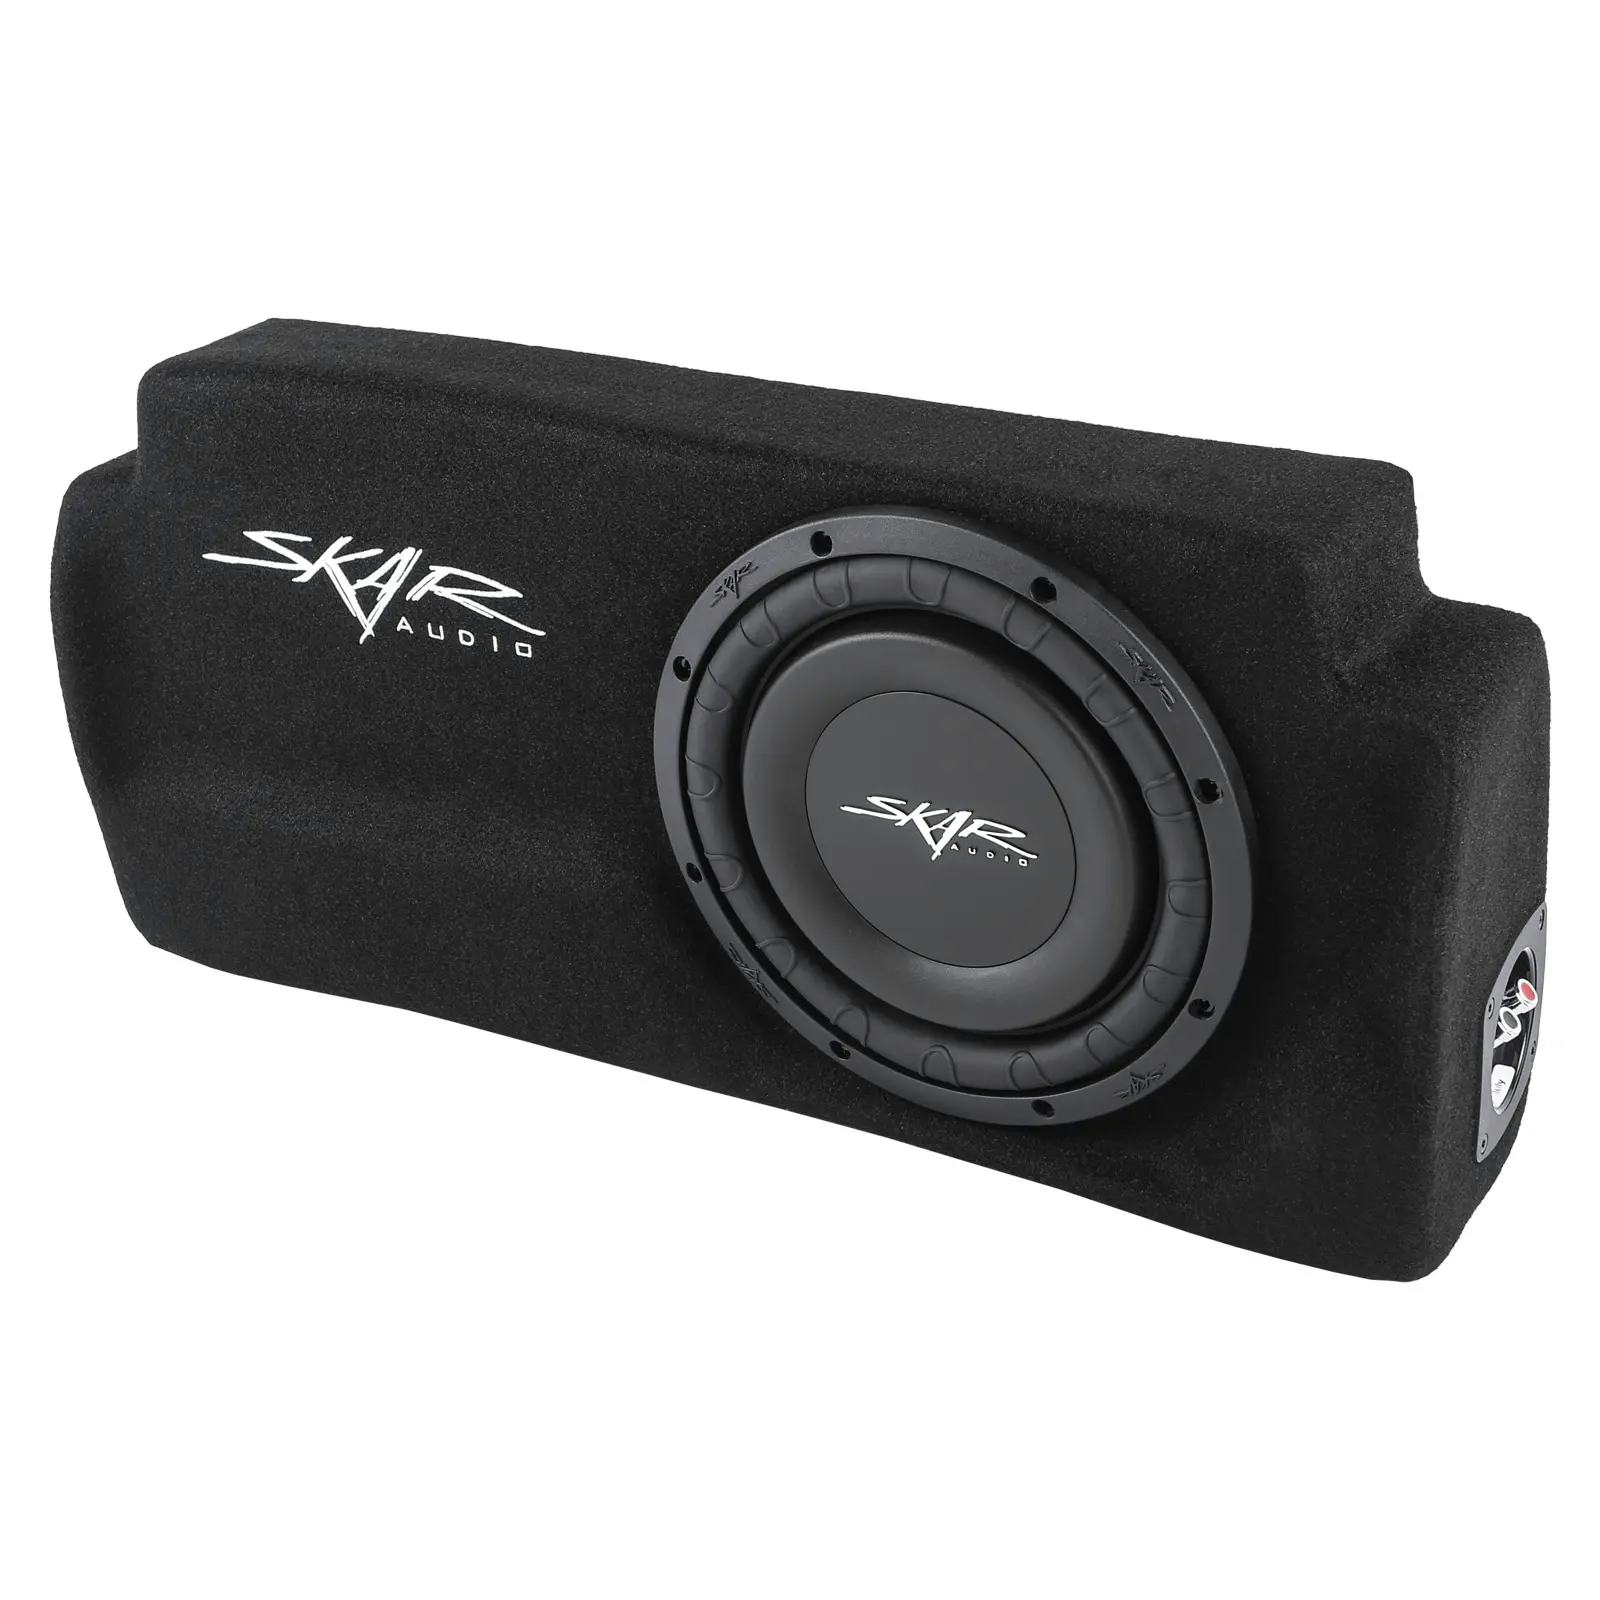 Single 10" 1,000W Max Power Loaded Subwoofer Enclosure Compatible with 2016-Up Toyota Tacoma Double Cab Max Trucks #1